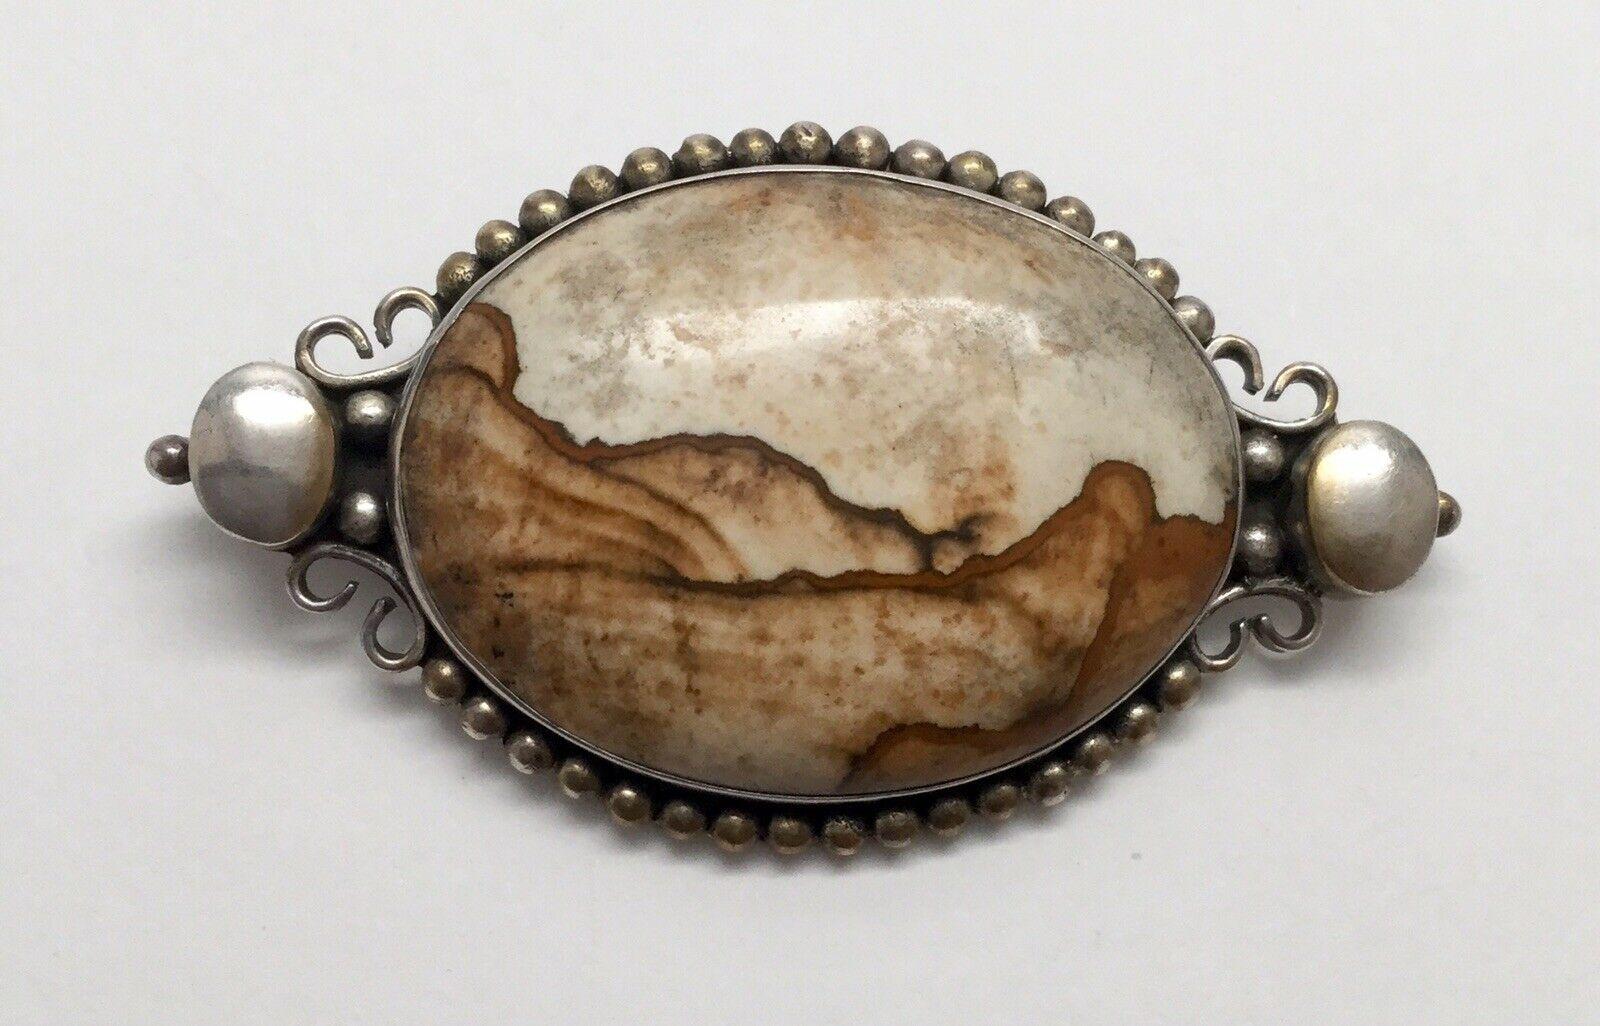 Sterling Silver Picture / Landscape jasper petrified wood pendant pin.

Marked 925

Measures: 2 1/2